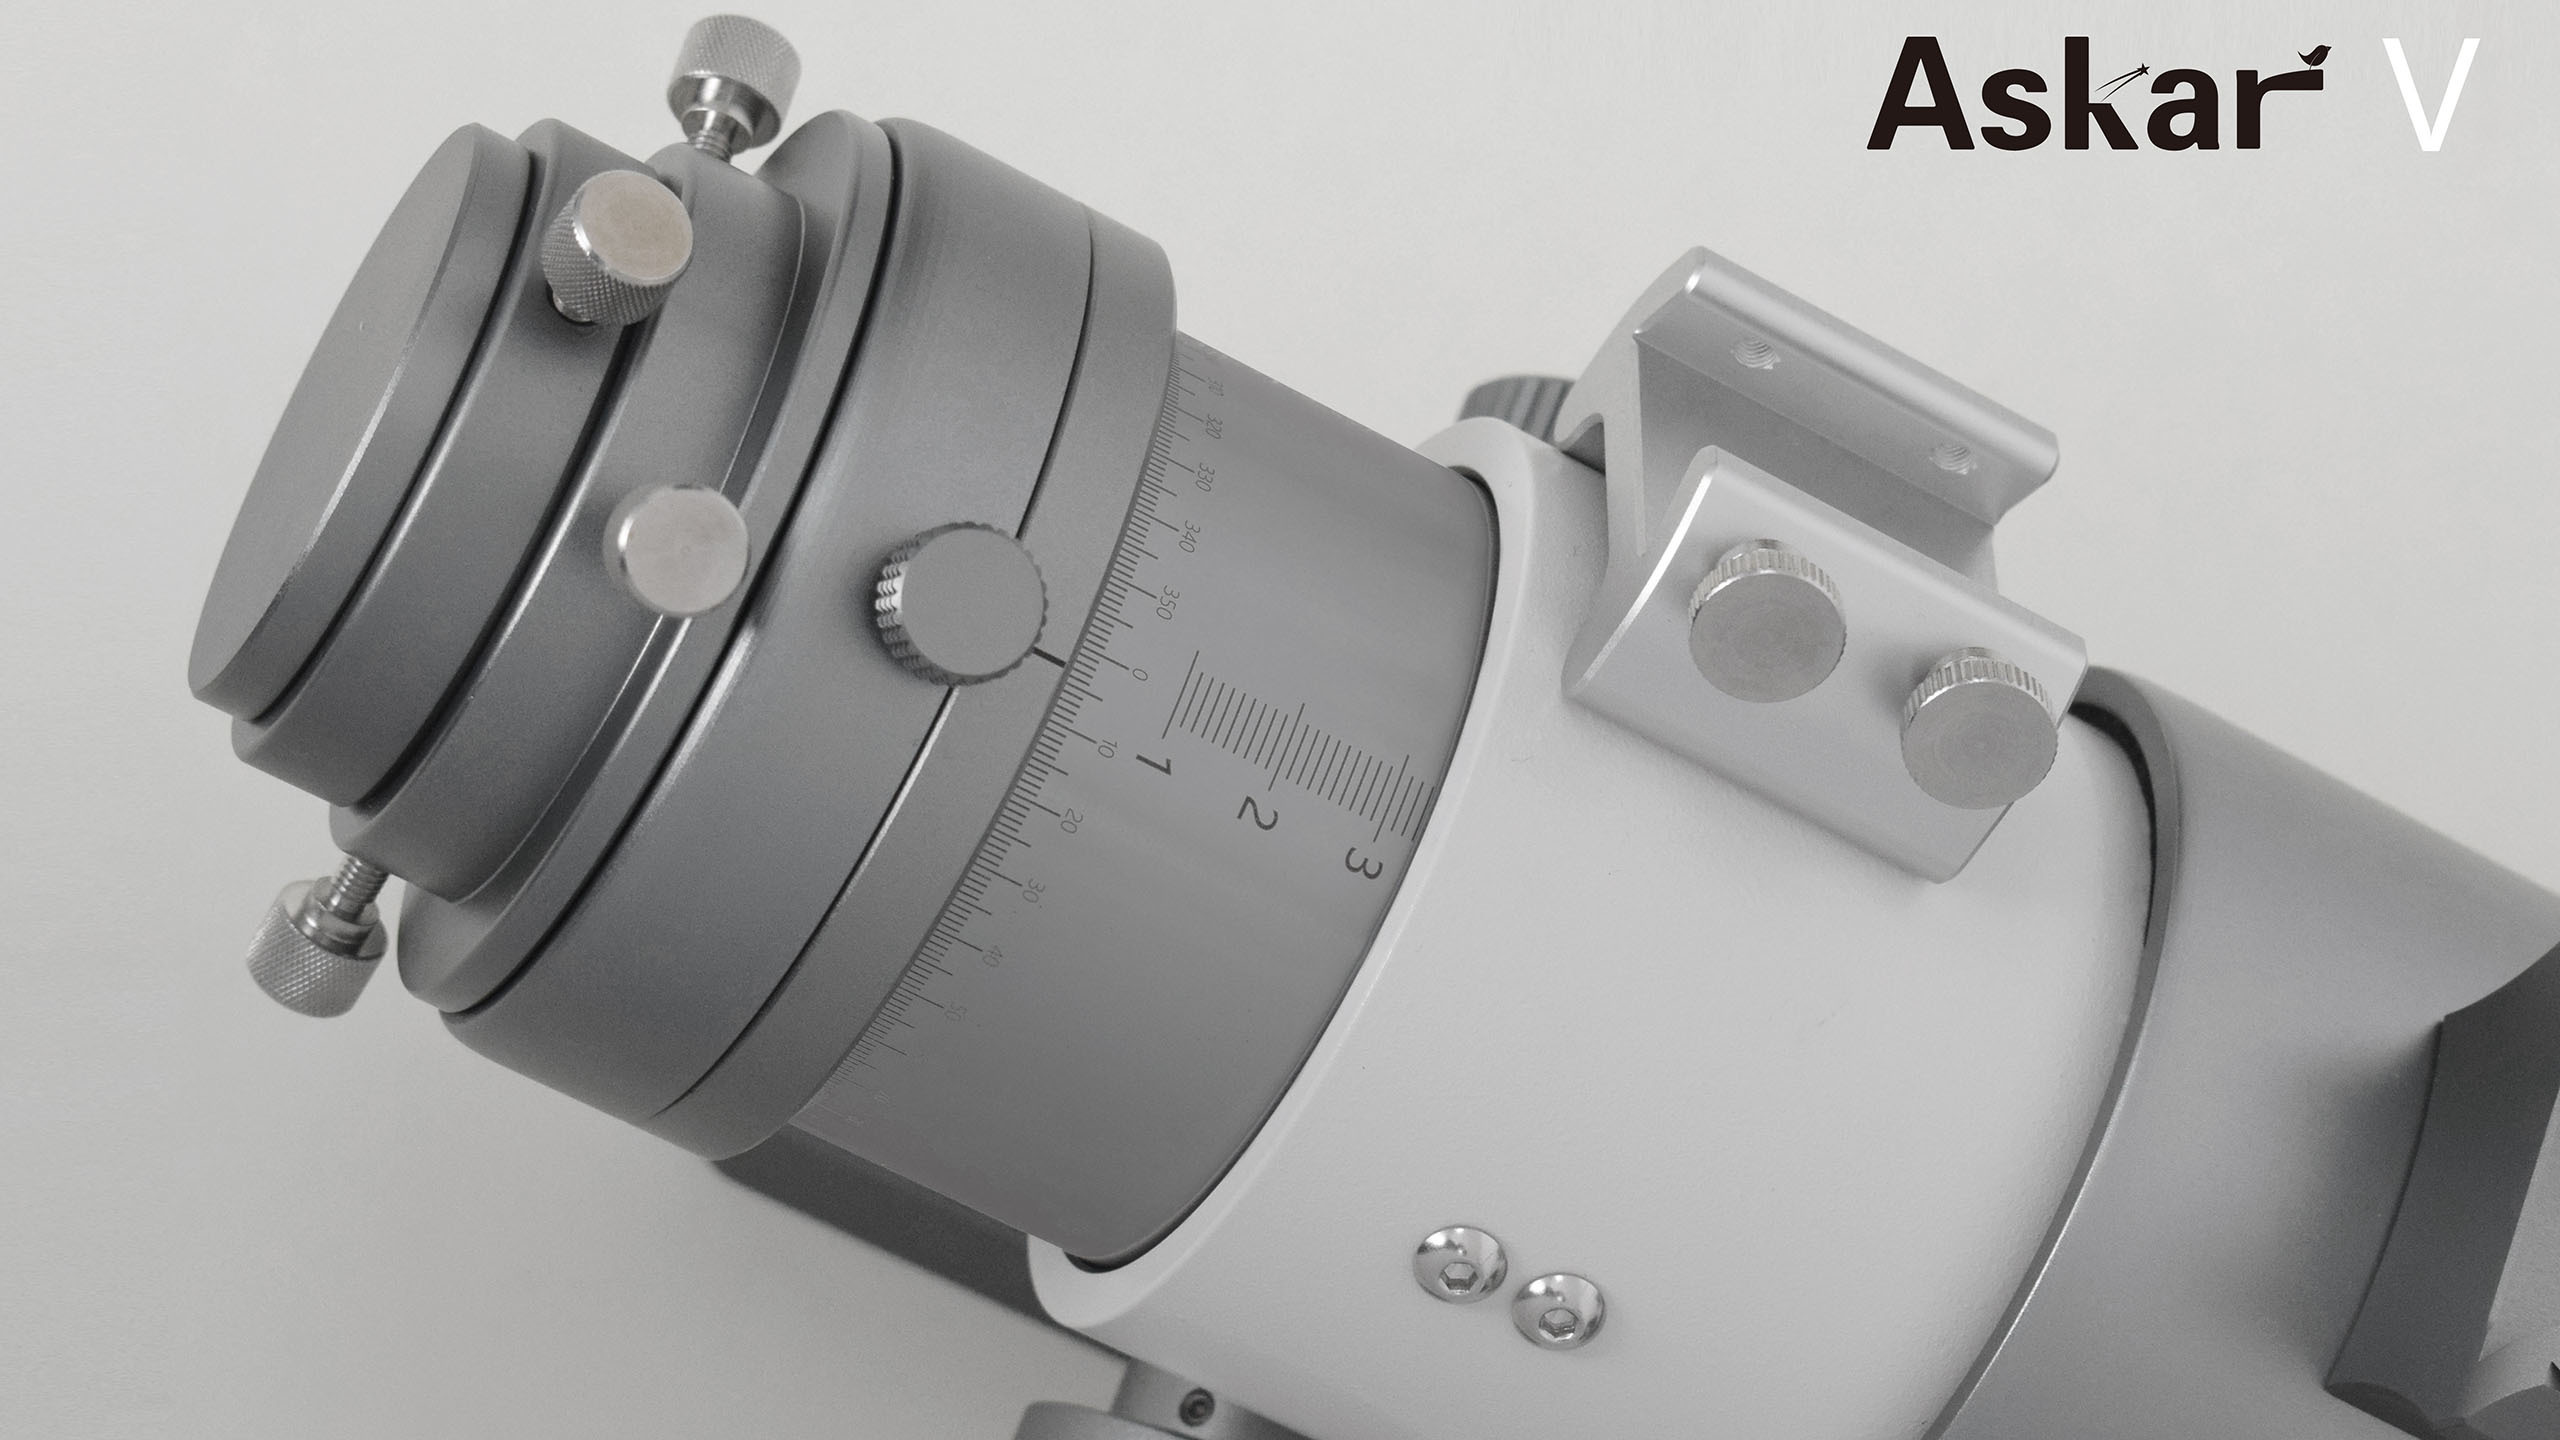 New review on ASKAR V added to the site ——Our experts review the latest kit——Askar V apo modular telescope kit